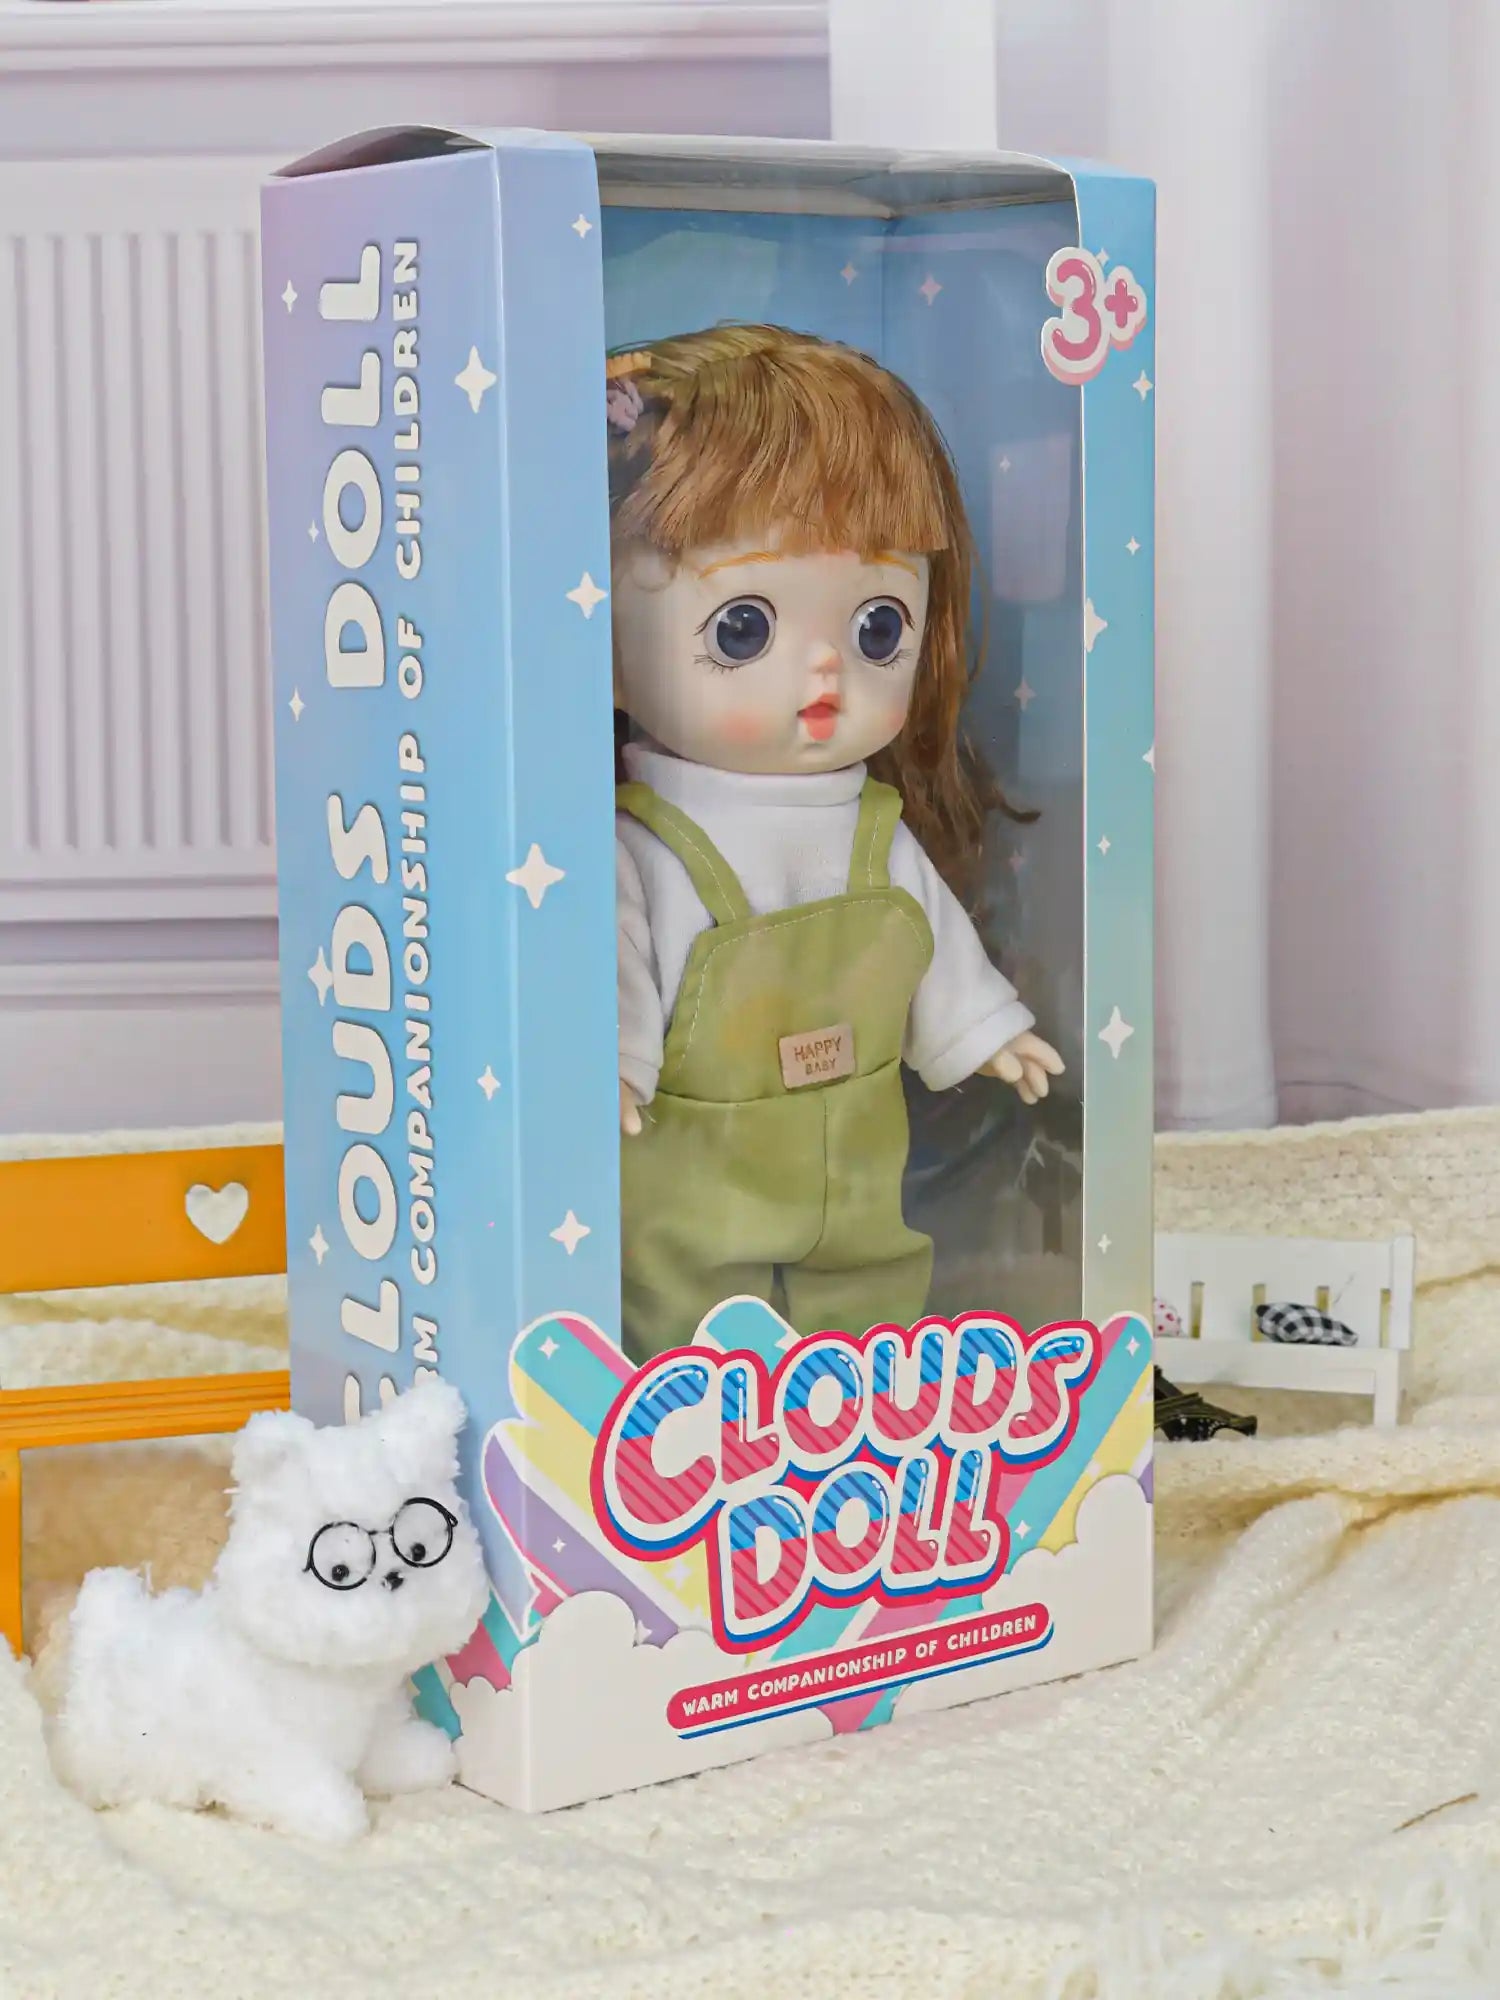 A charming doll with a cozy look, paired with a playful toy cat in glasses and a toy car on the side.